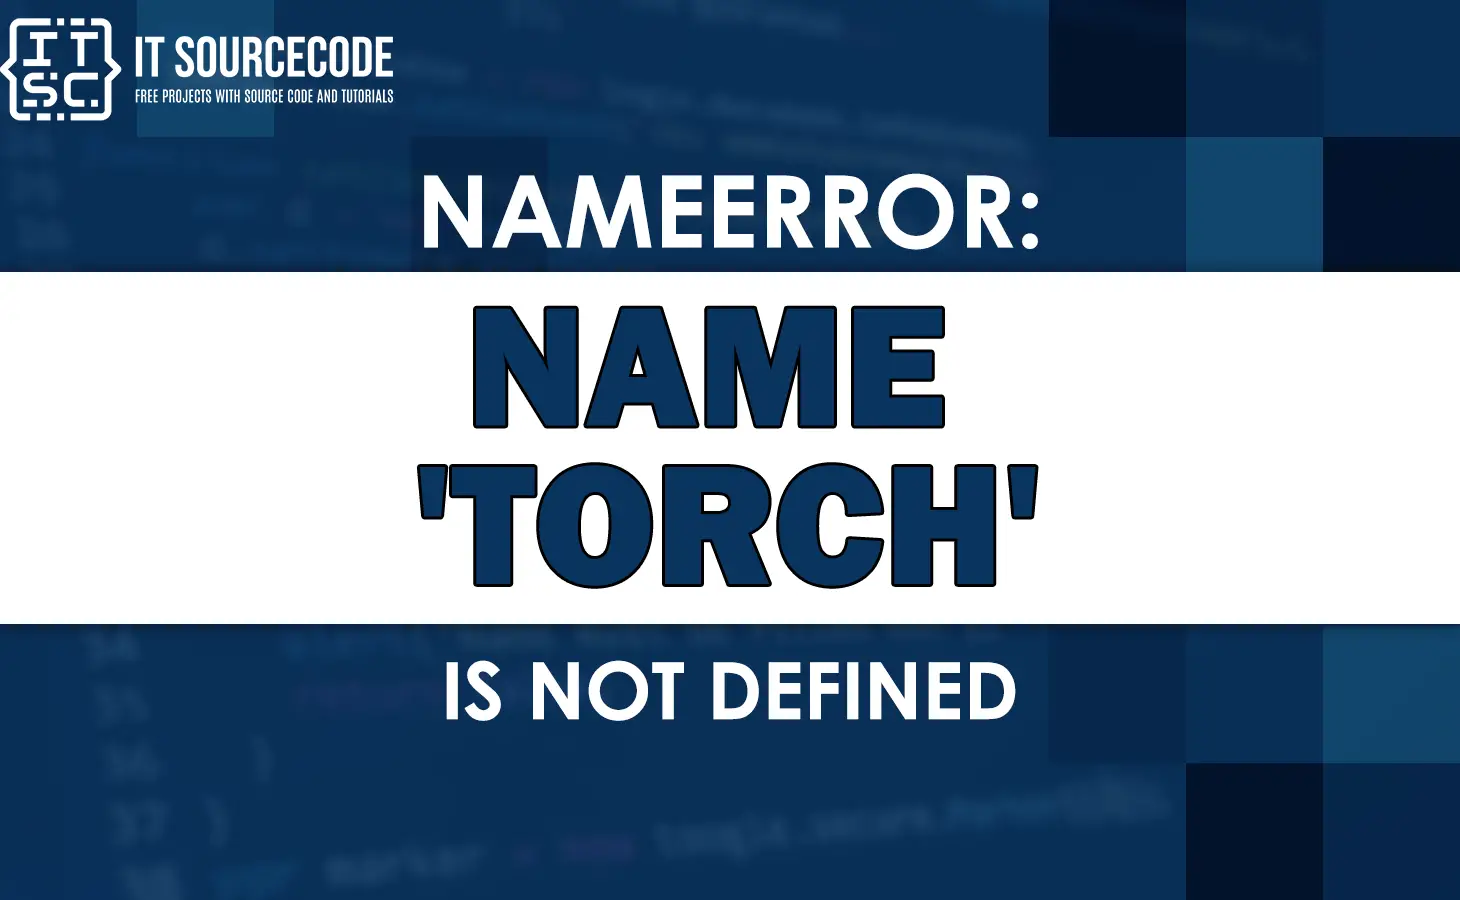 Nameerror: name 'torch' is not defined